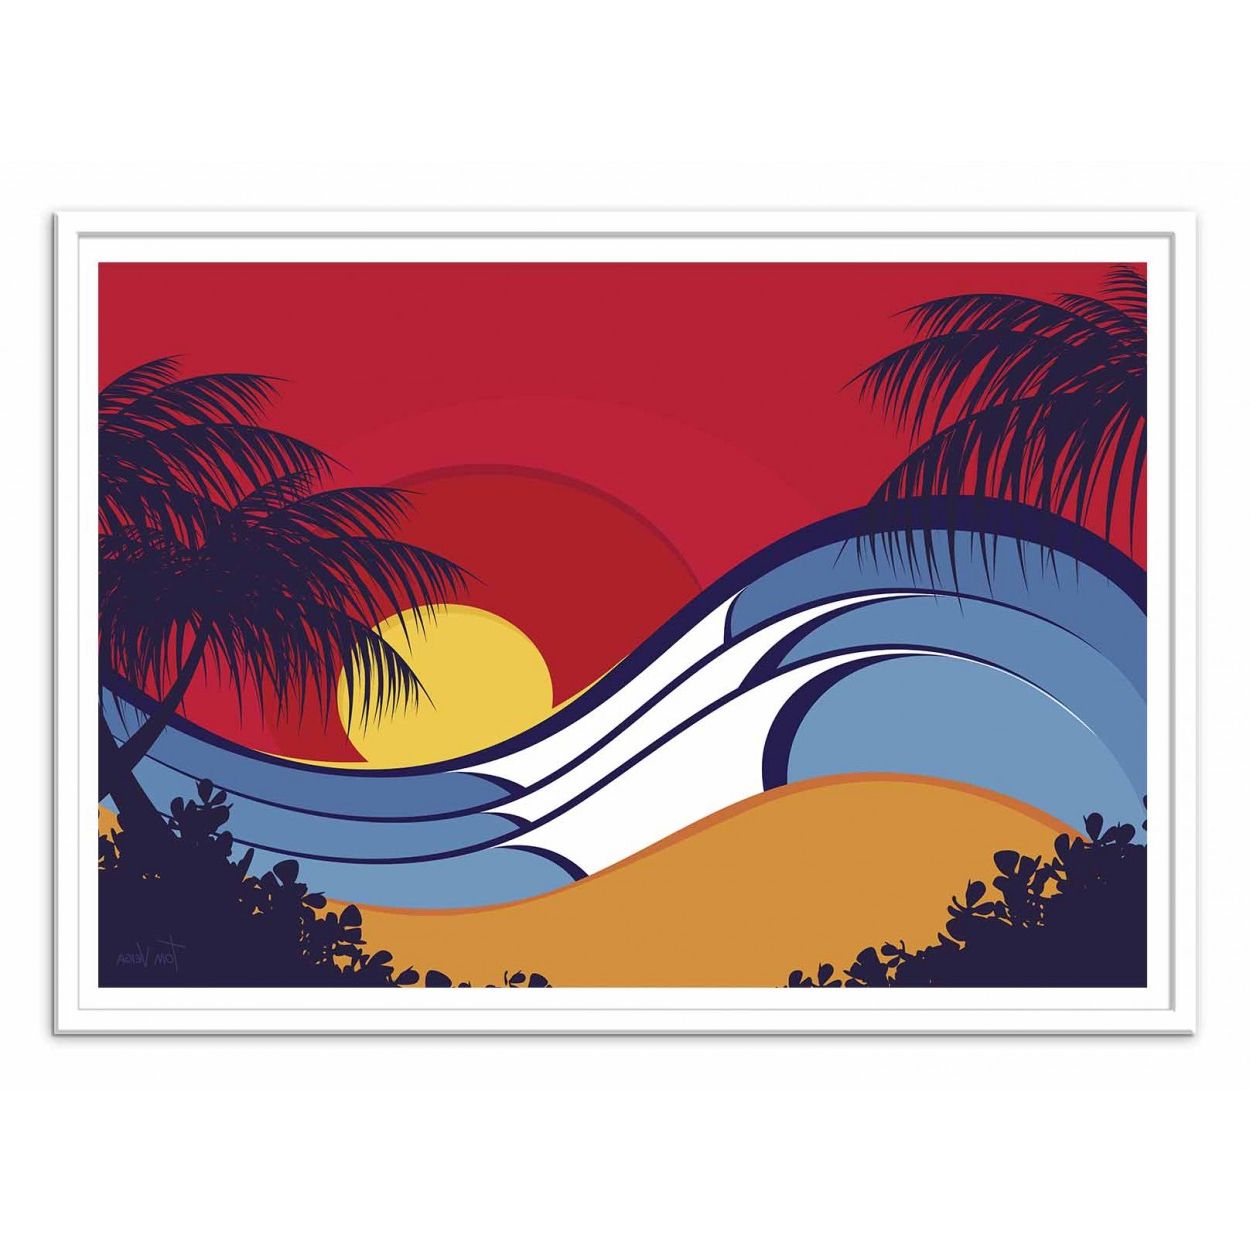 Widely Used Art Poster Beach And Surf – Hawaii Waves,tom Veiga Throughout Waves Wall Art (View 11 of 15)